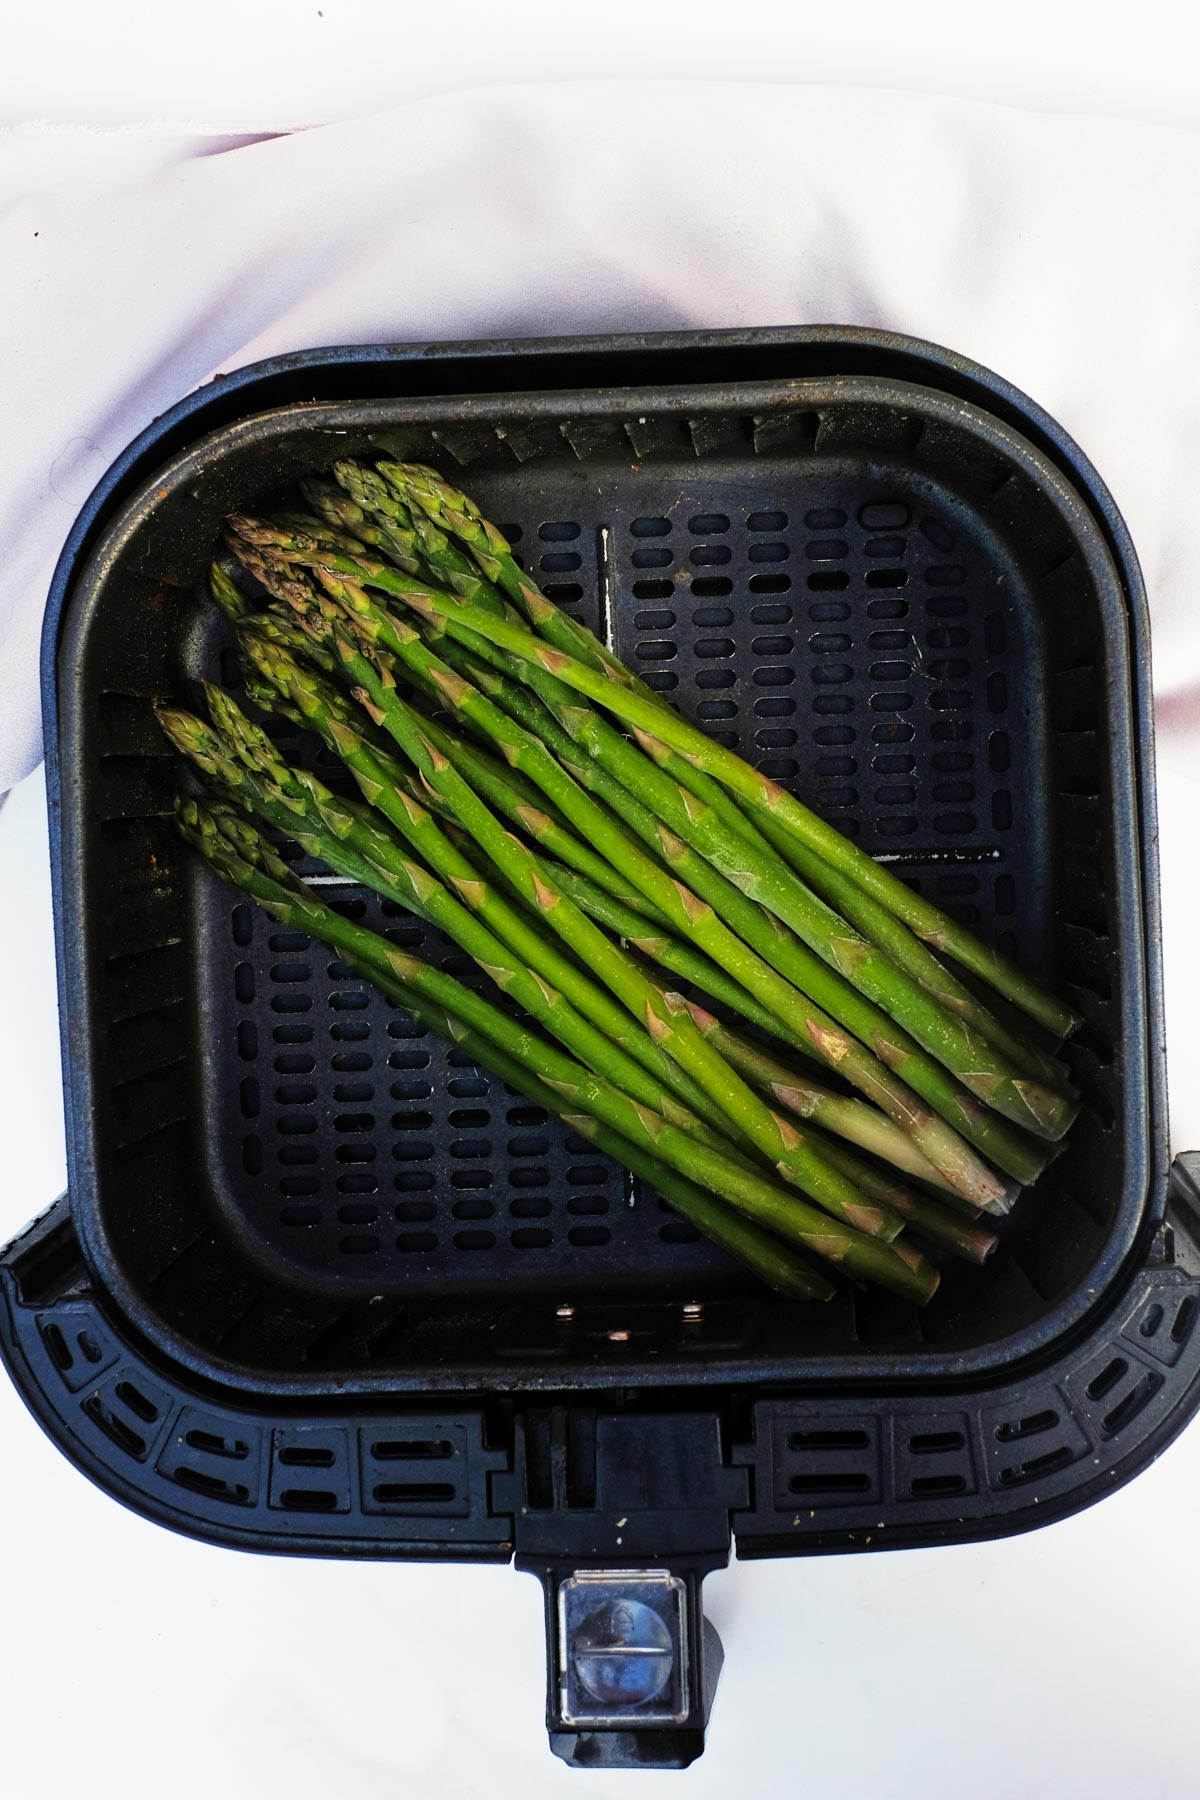 the finished frozen asparagus in air fryer basket and ready to serve